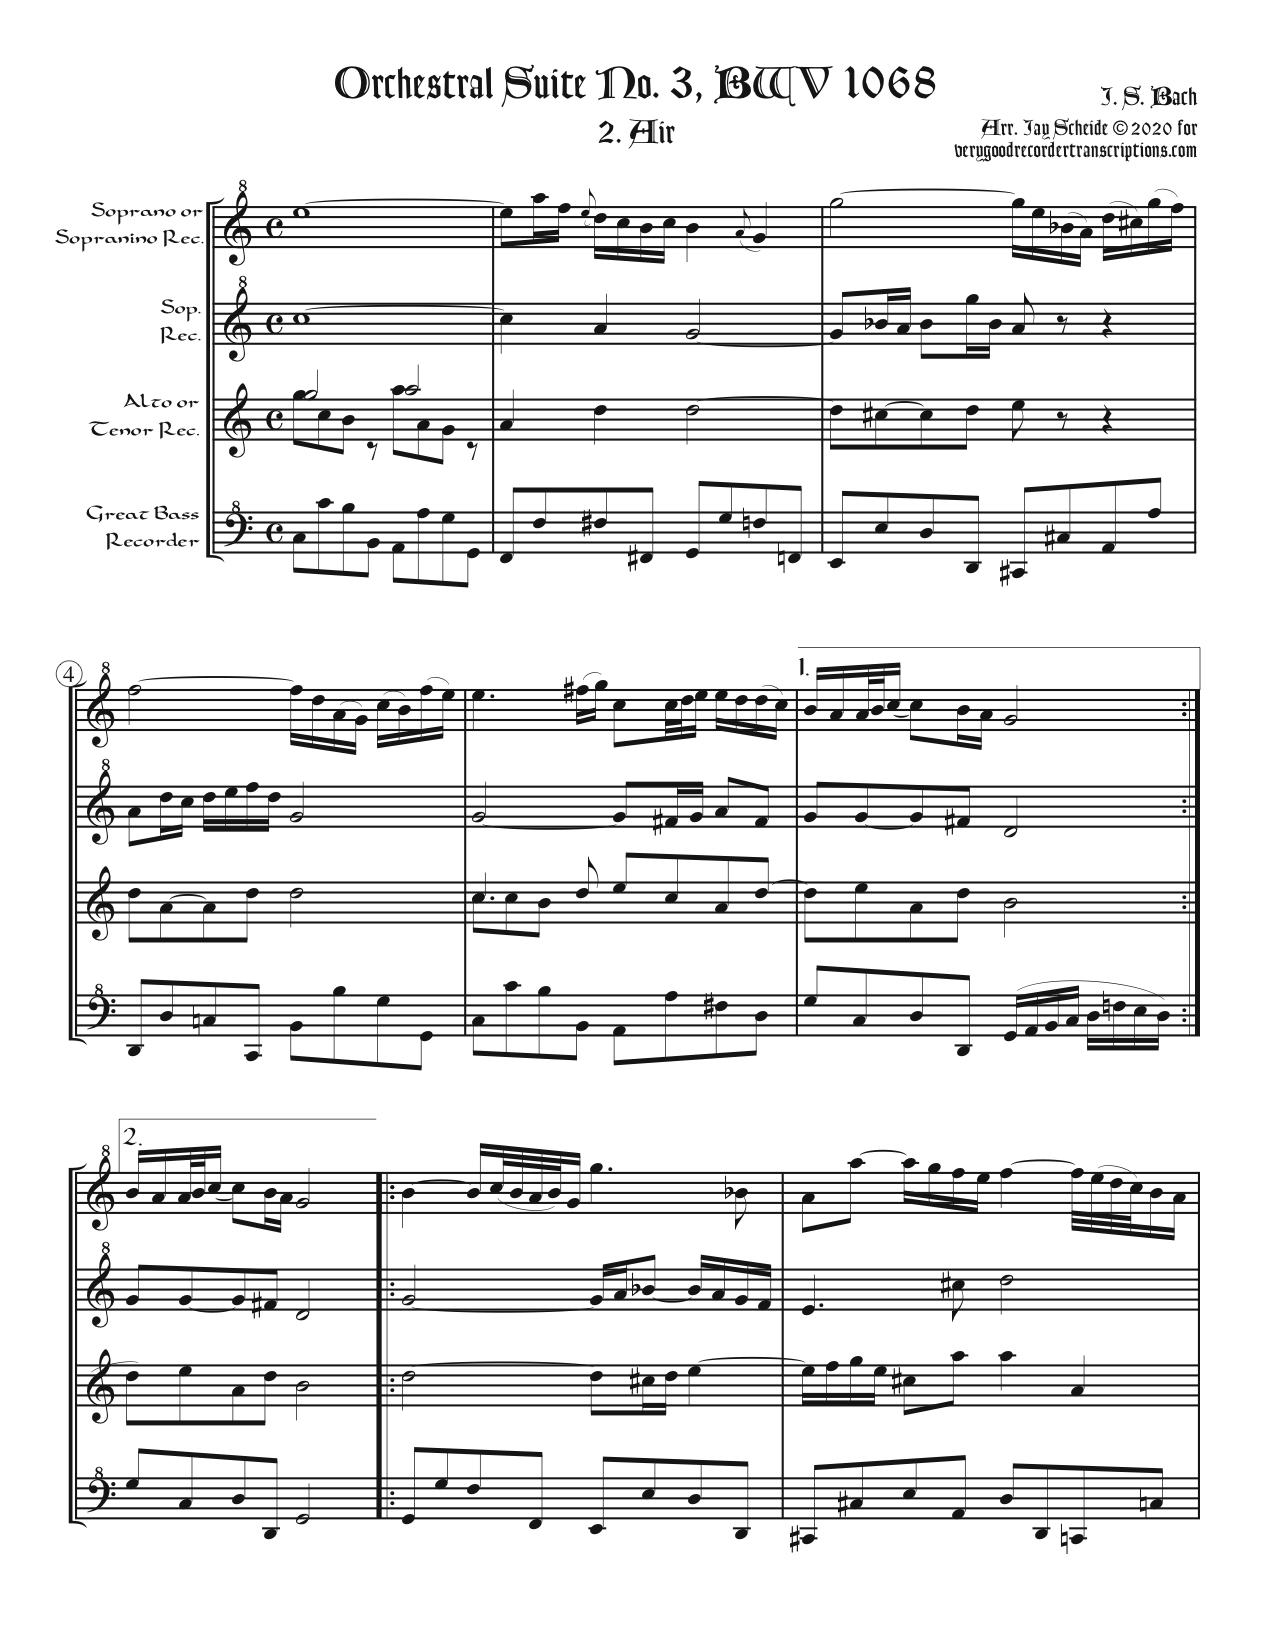 Air from Suite No. 3, BWV 1068 (“Air on the G-string”), arr. for Recorder Quartet